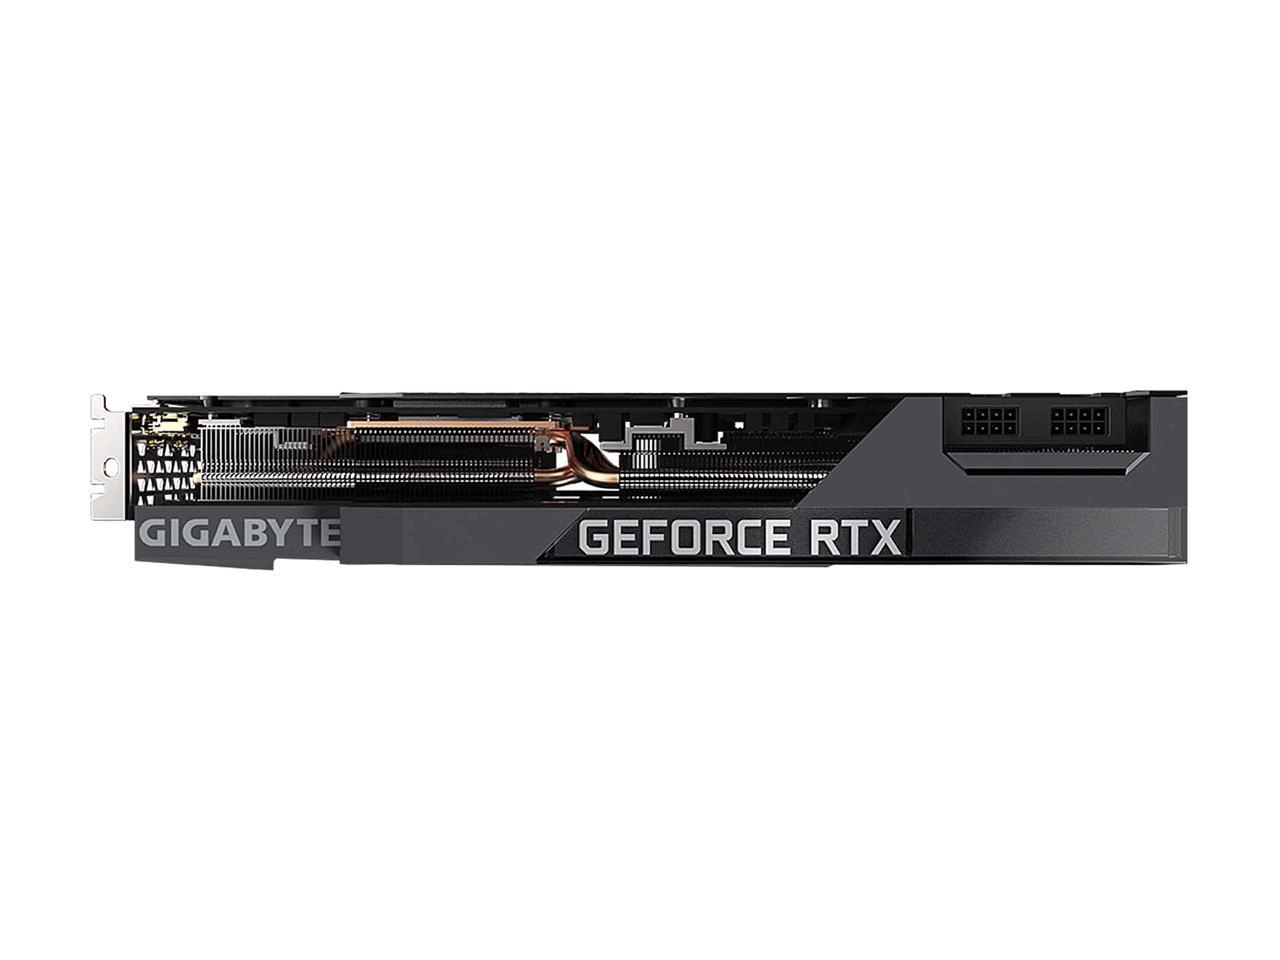 GIGABYTE GeForce RTX 3080 EAGLE 10G Front View